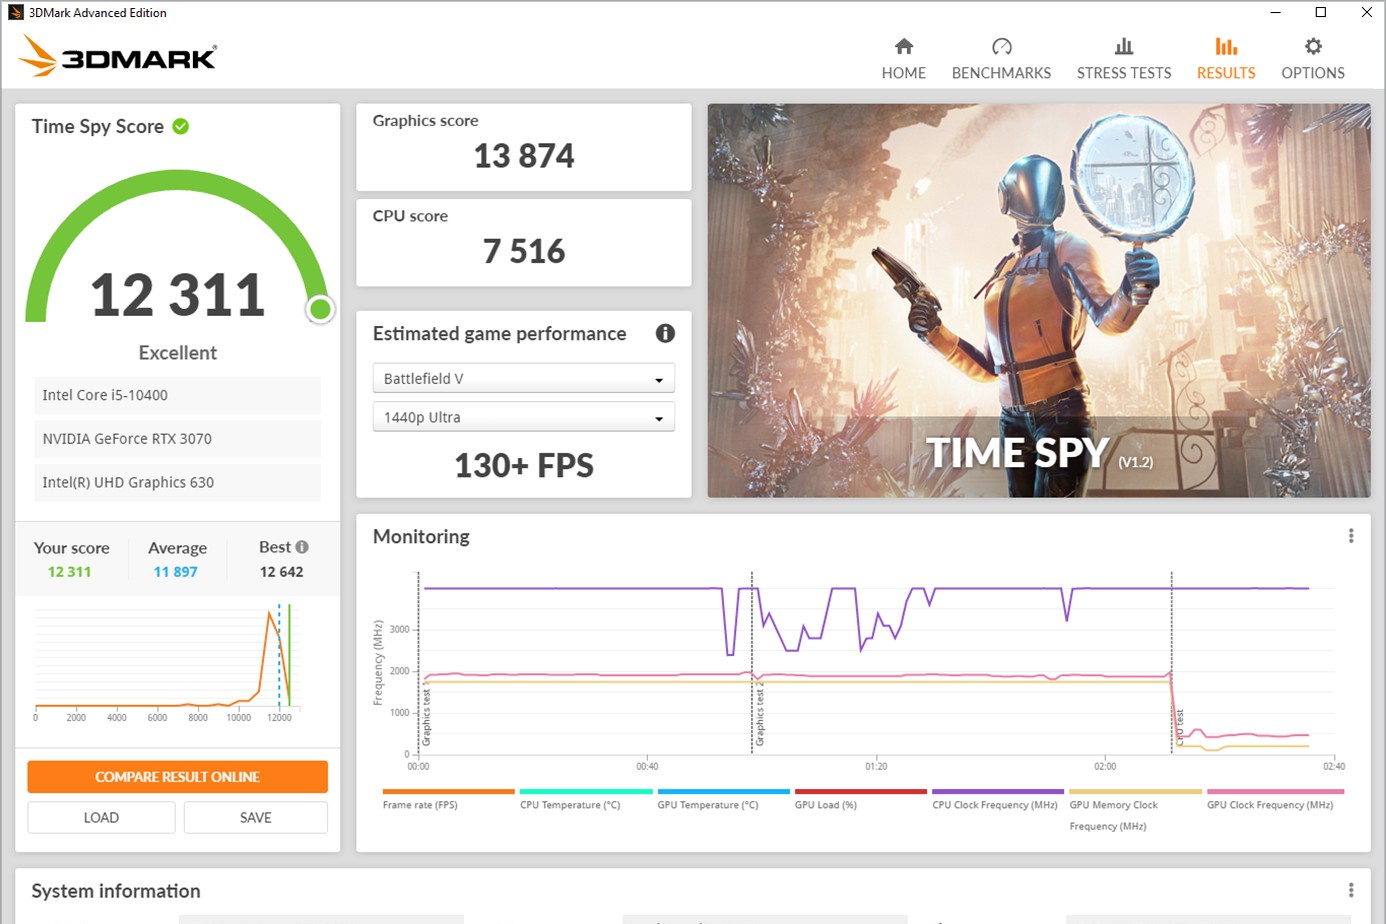 3DMark's Time Spy results dashboard